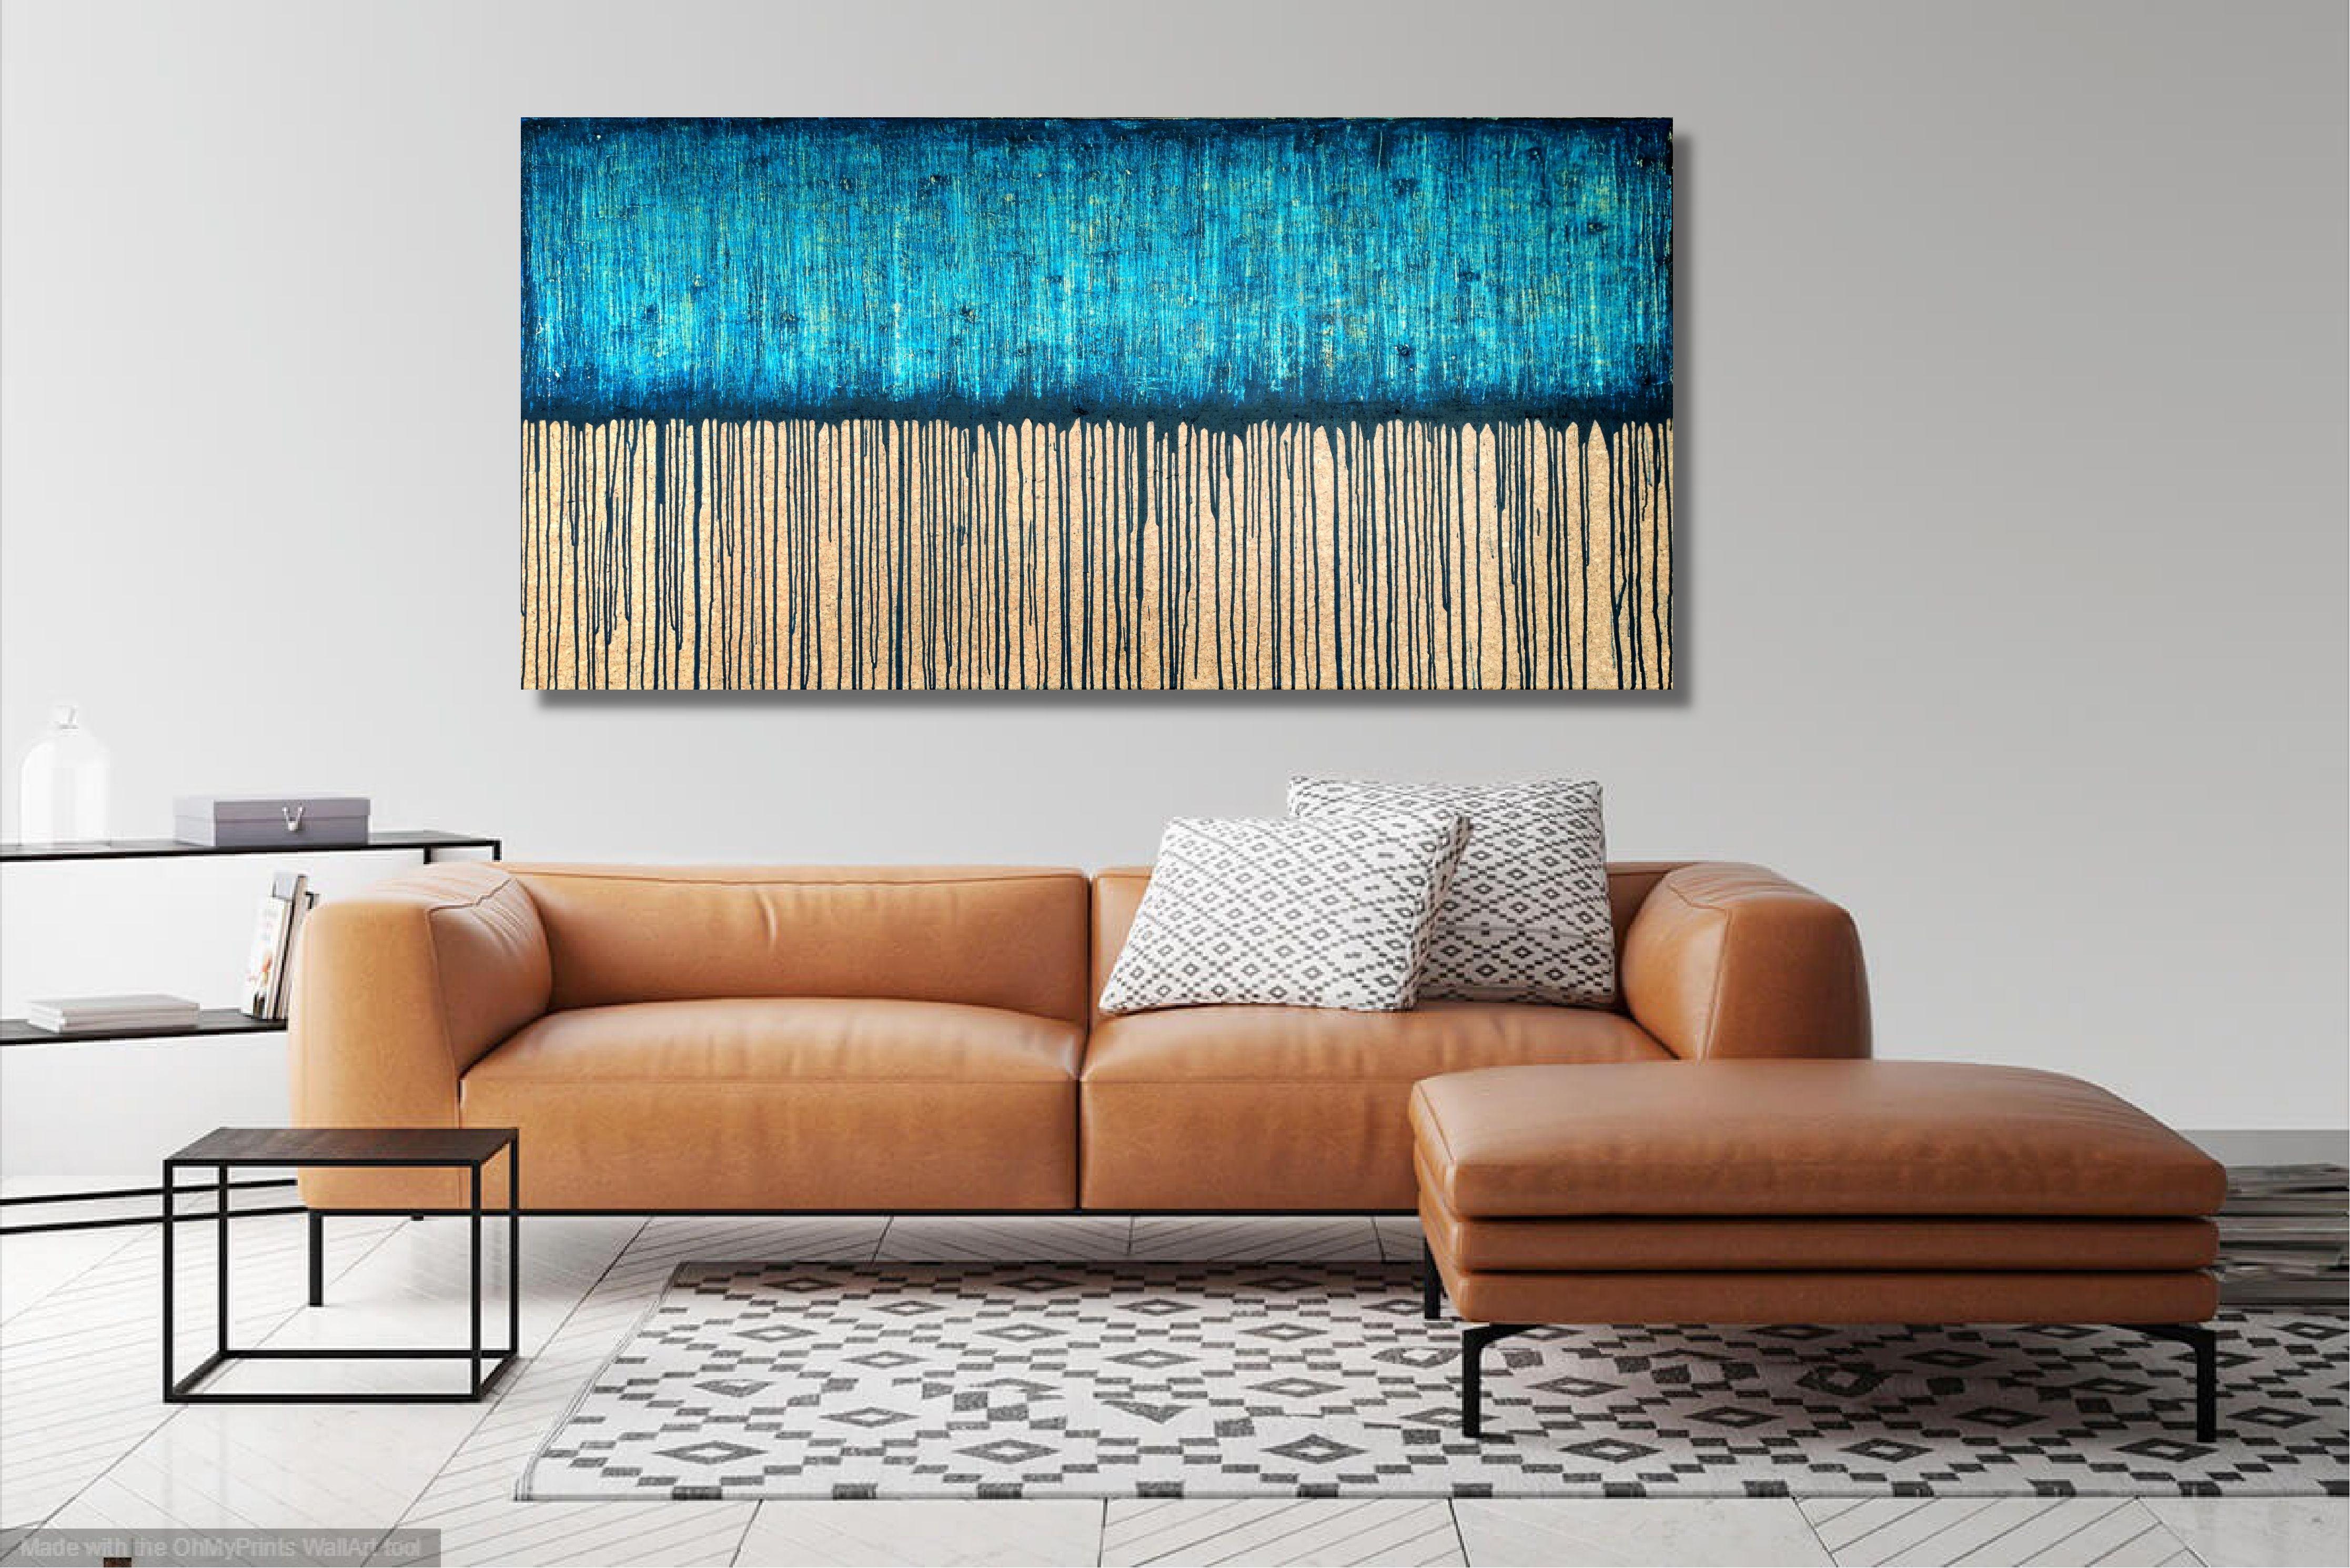 This is a one of a kind painting, an absolutely spontaneous, vibrant and unique creation by Carla SÃ¡ Fernandes.     This high quality acrylic painting is done on natural cork fabric (cork leather) stretched on a wood frame, gallery wrapped, with no